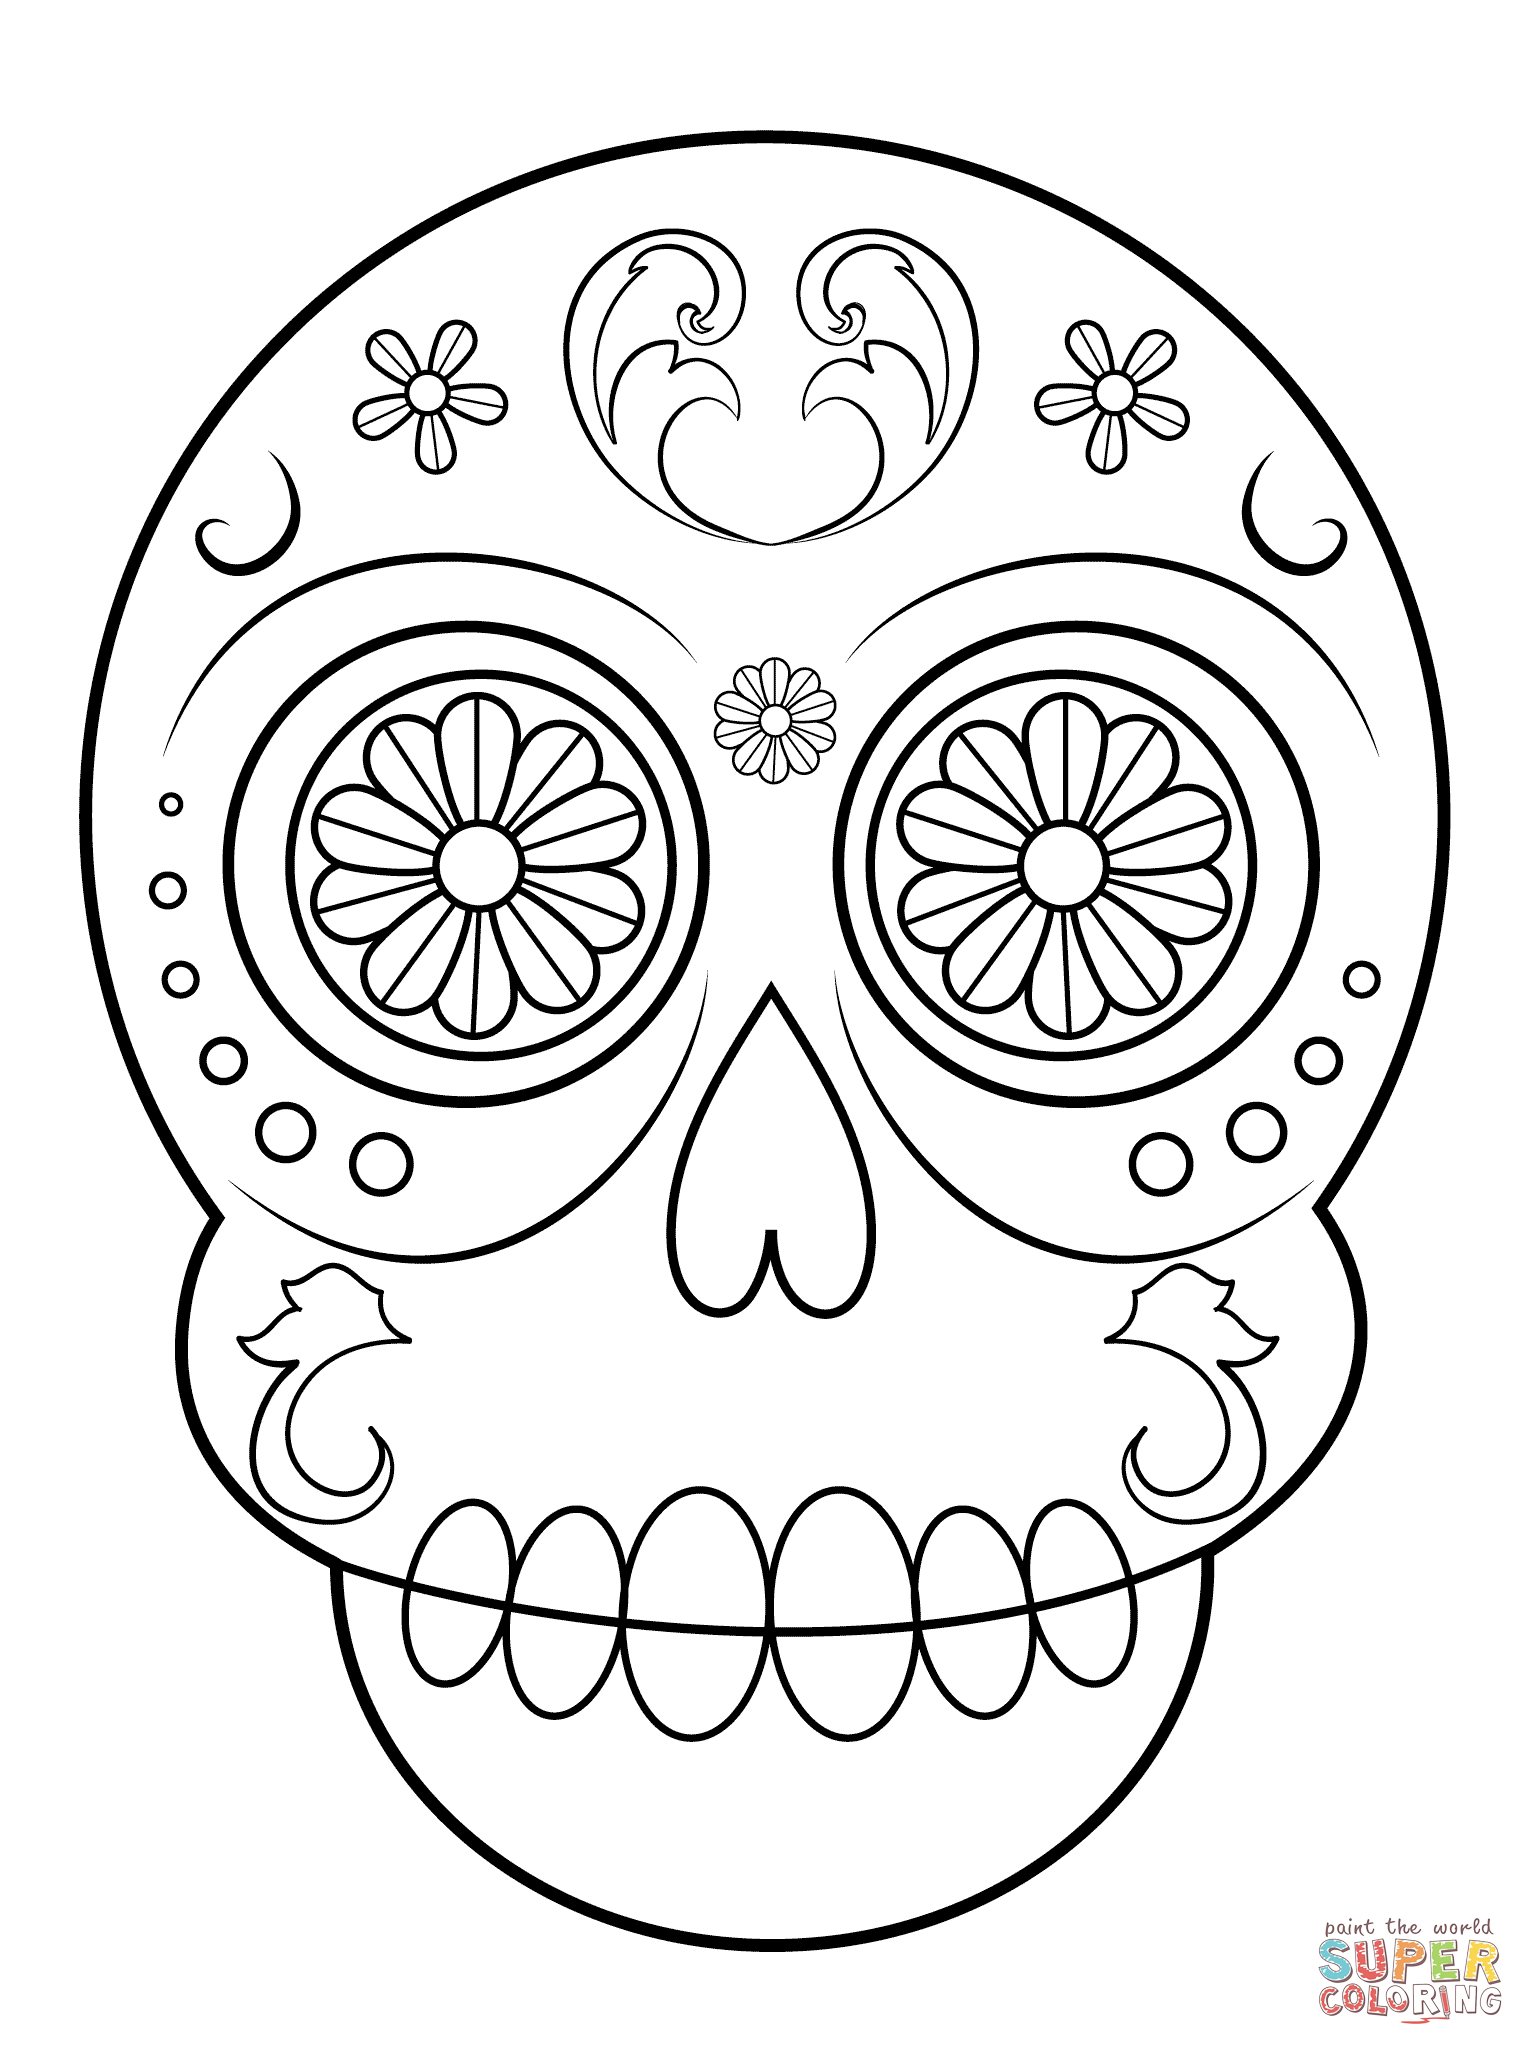 Coloring Page Skull - Coloring Pages for Kids and for Adults